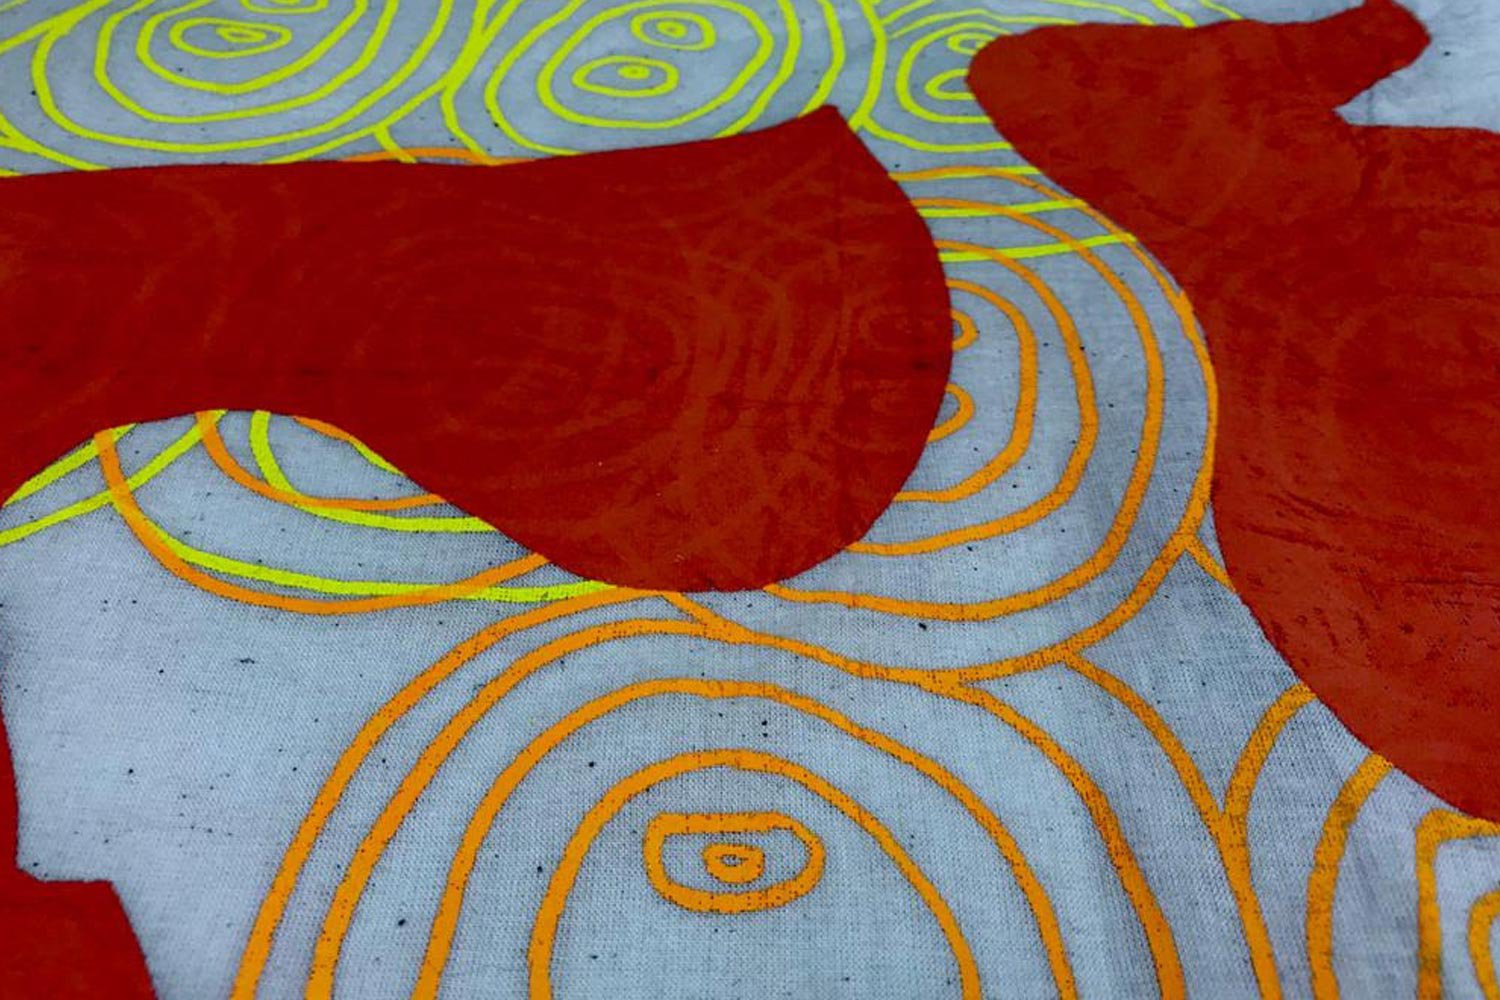 Detail of swirling printed pattern in reds, yellow and grey